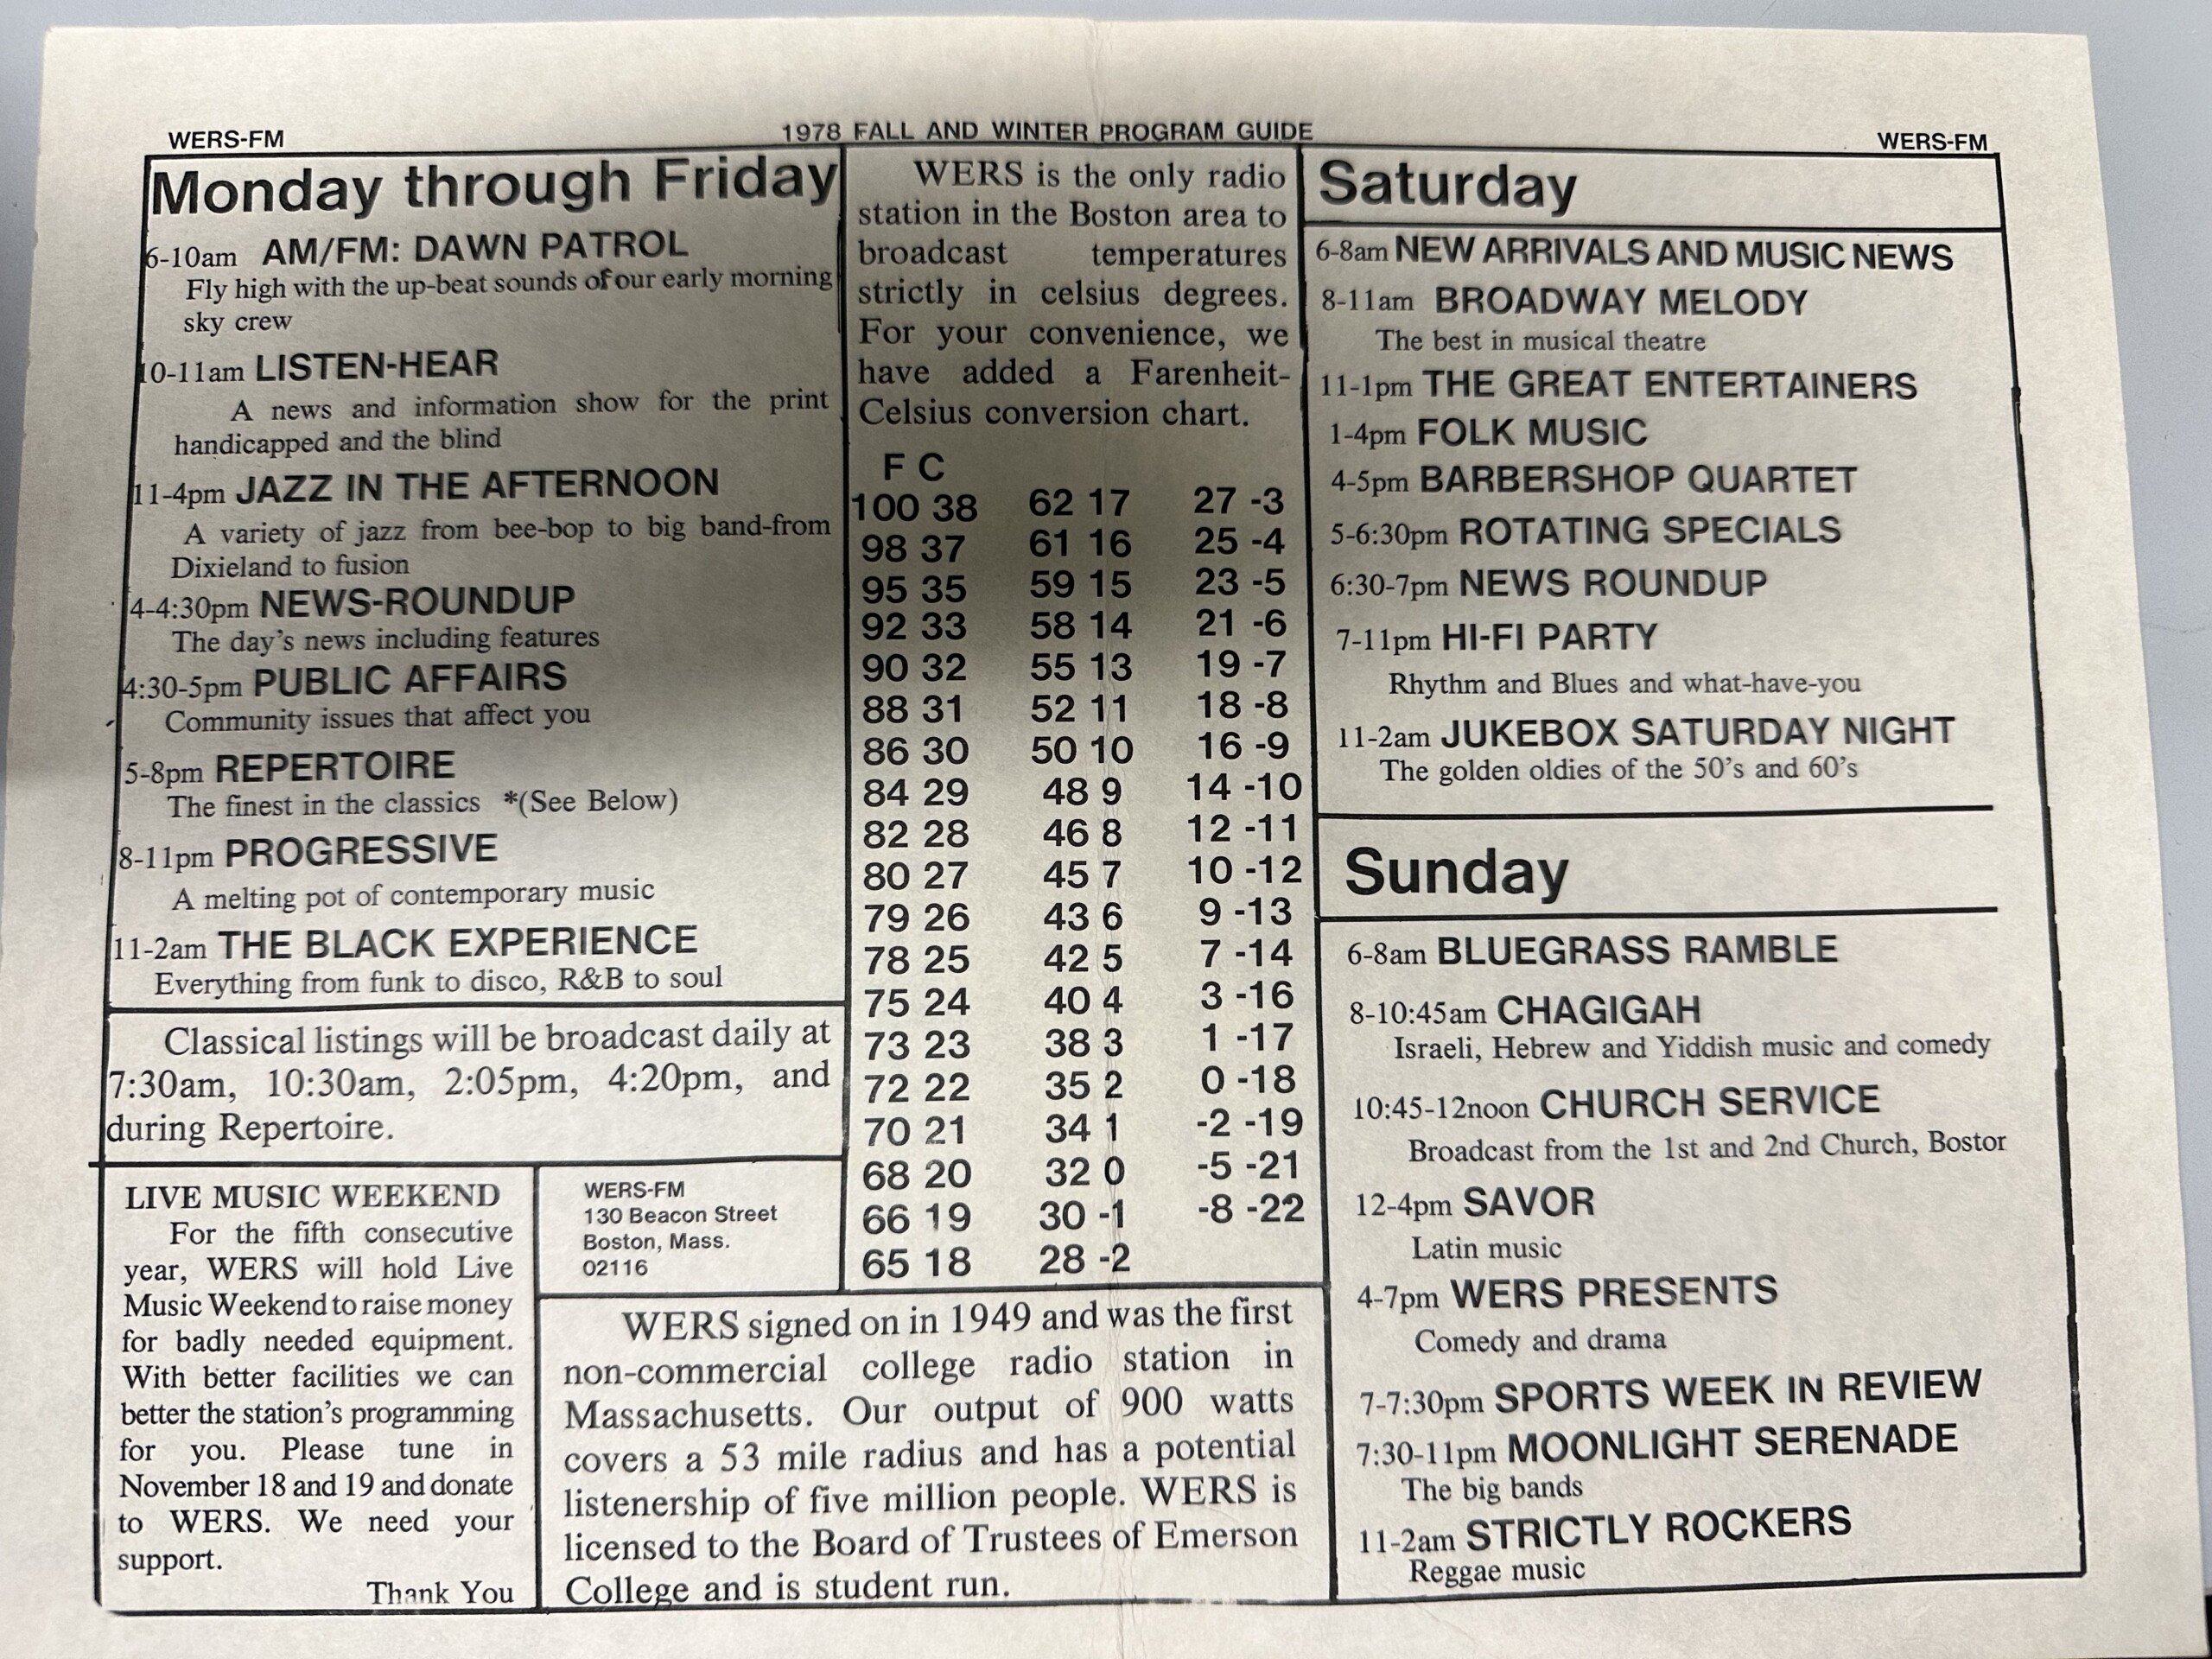 A print-out of WERS' programming schedule in 1978.